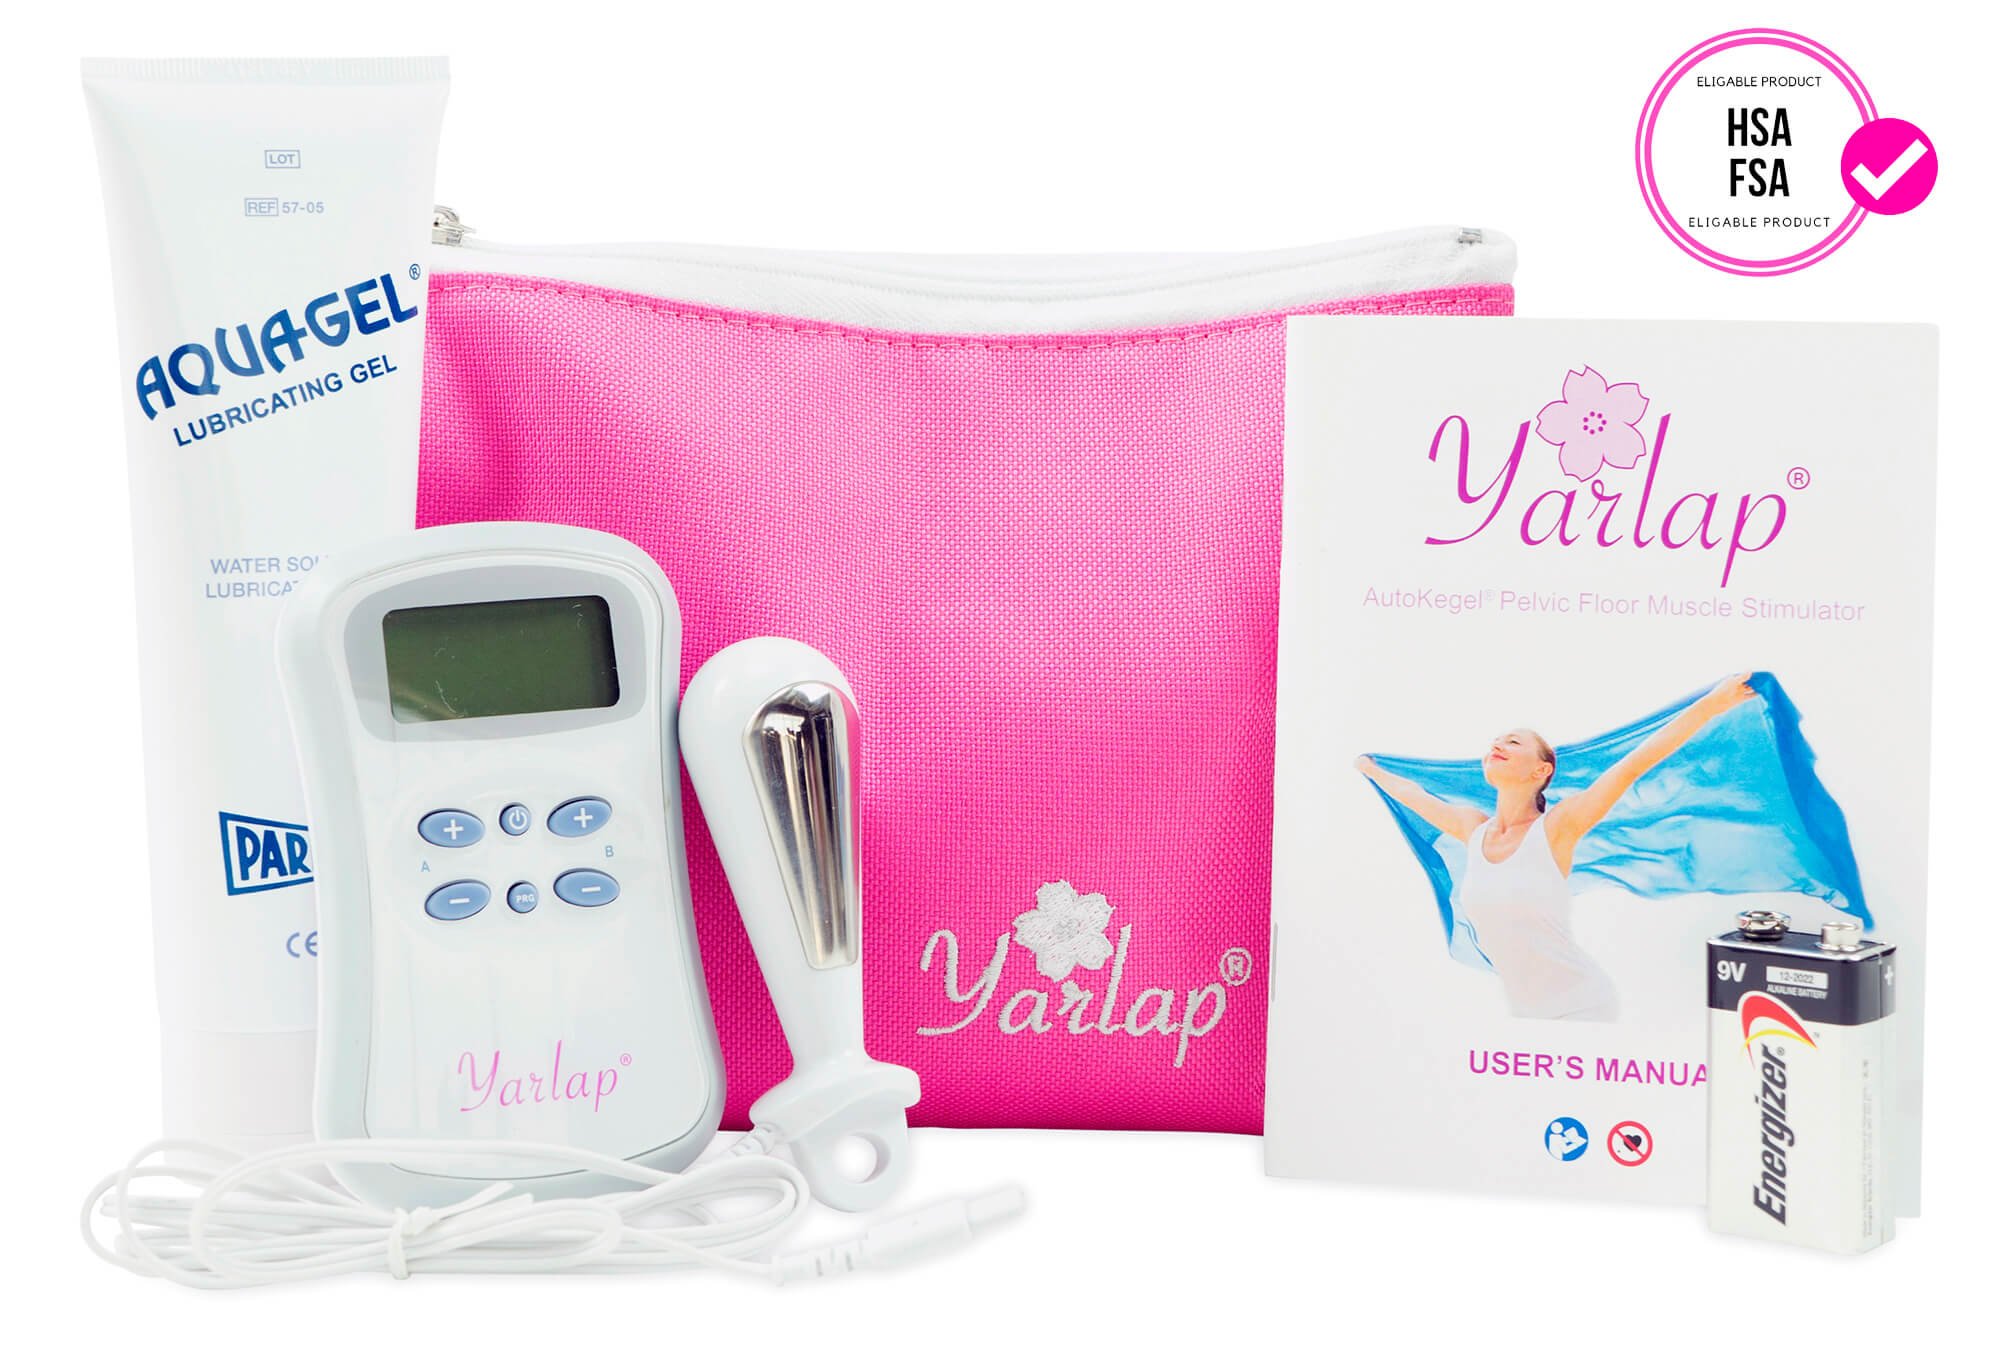 The Yarlap® With Autokegel® kegel exercise device